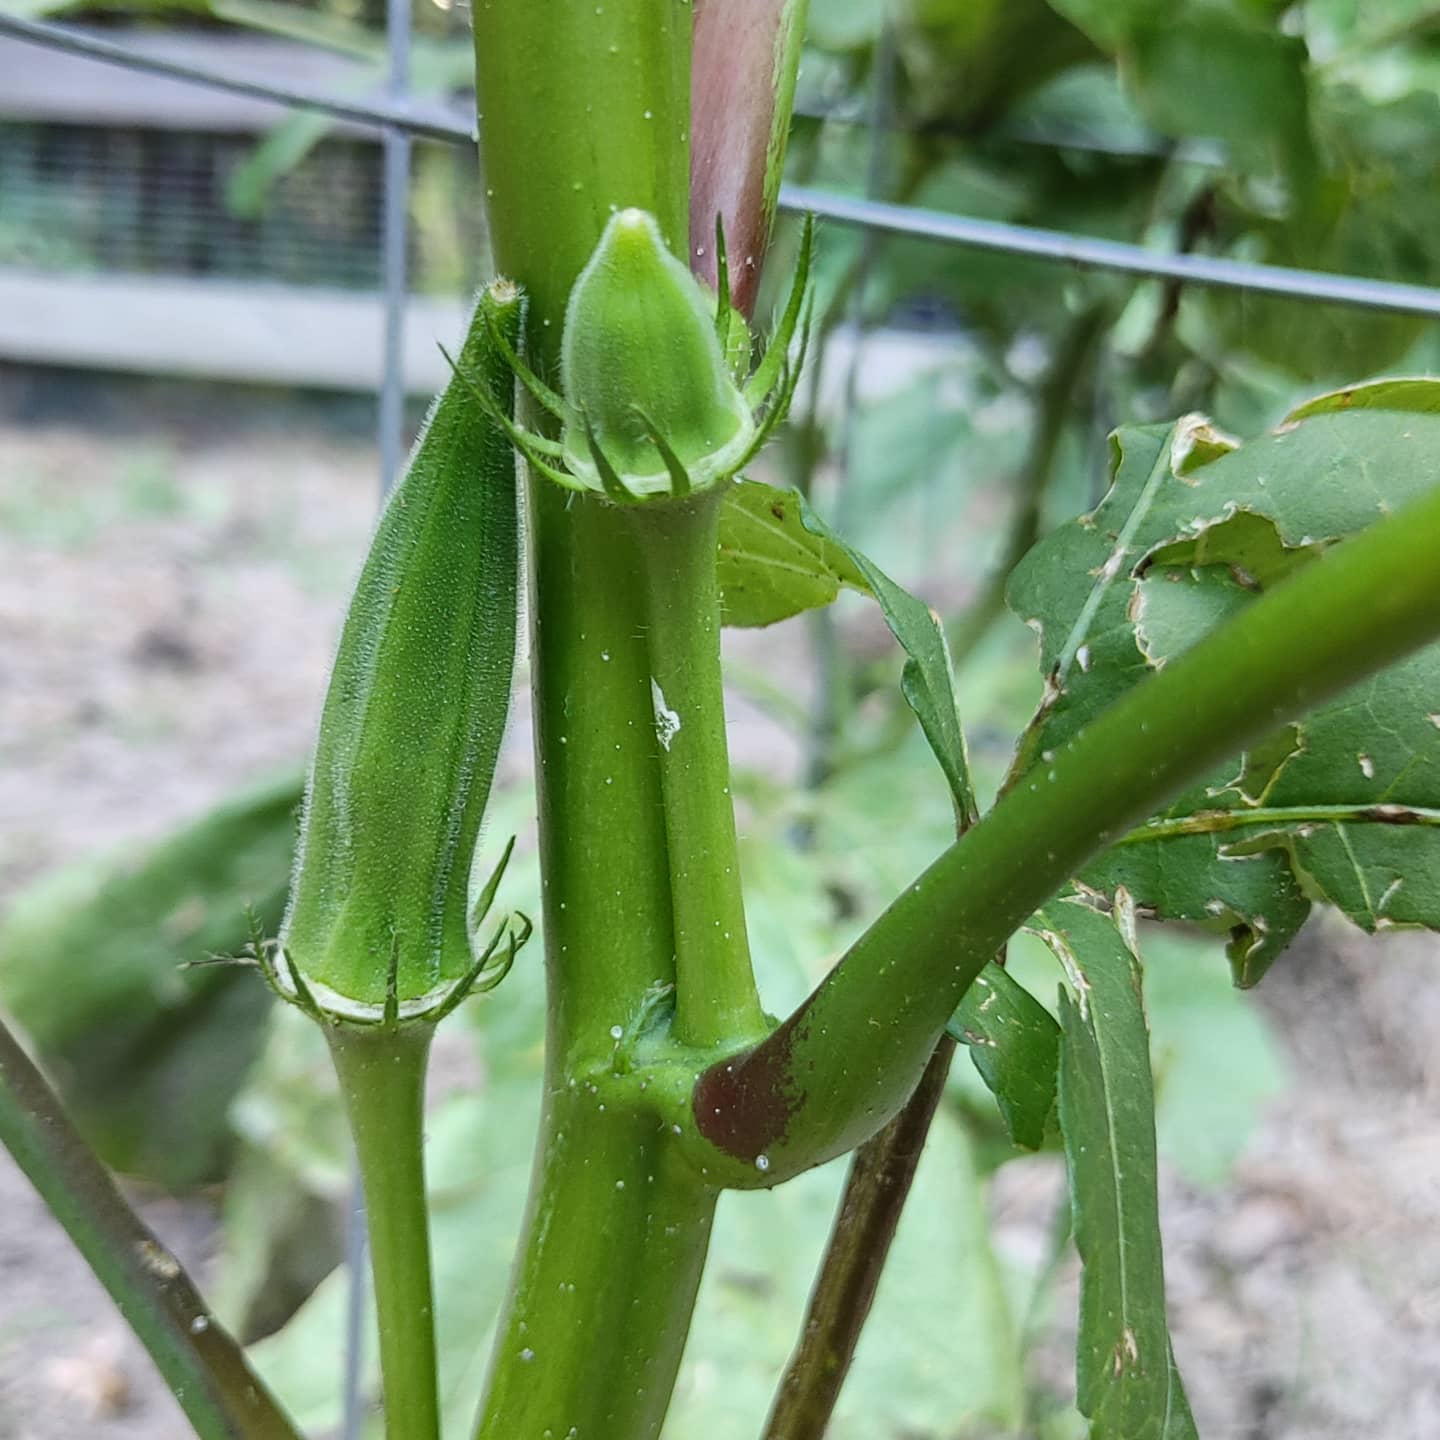 Look! I grew an okra! I don't particularly like okra but the plants looked really cute at the nursery so now I have two. I find it hilarious that they grow up into the air. I expected they would hang down like peppers.